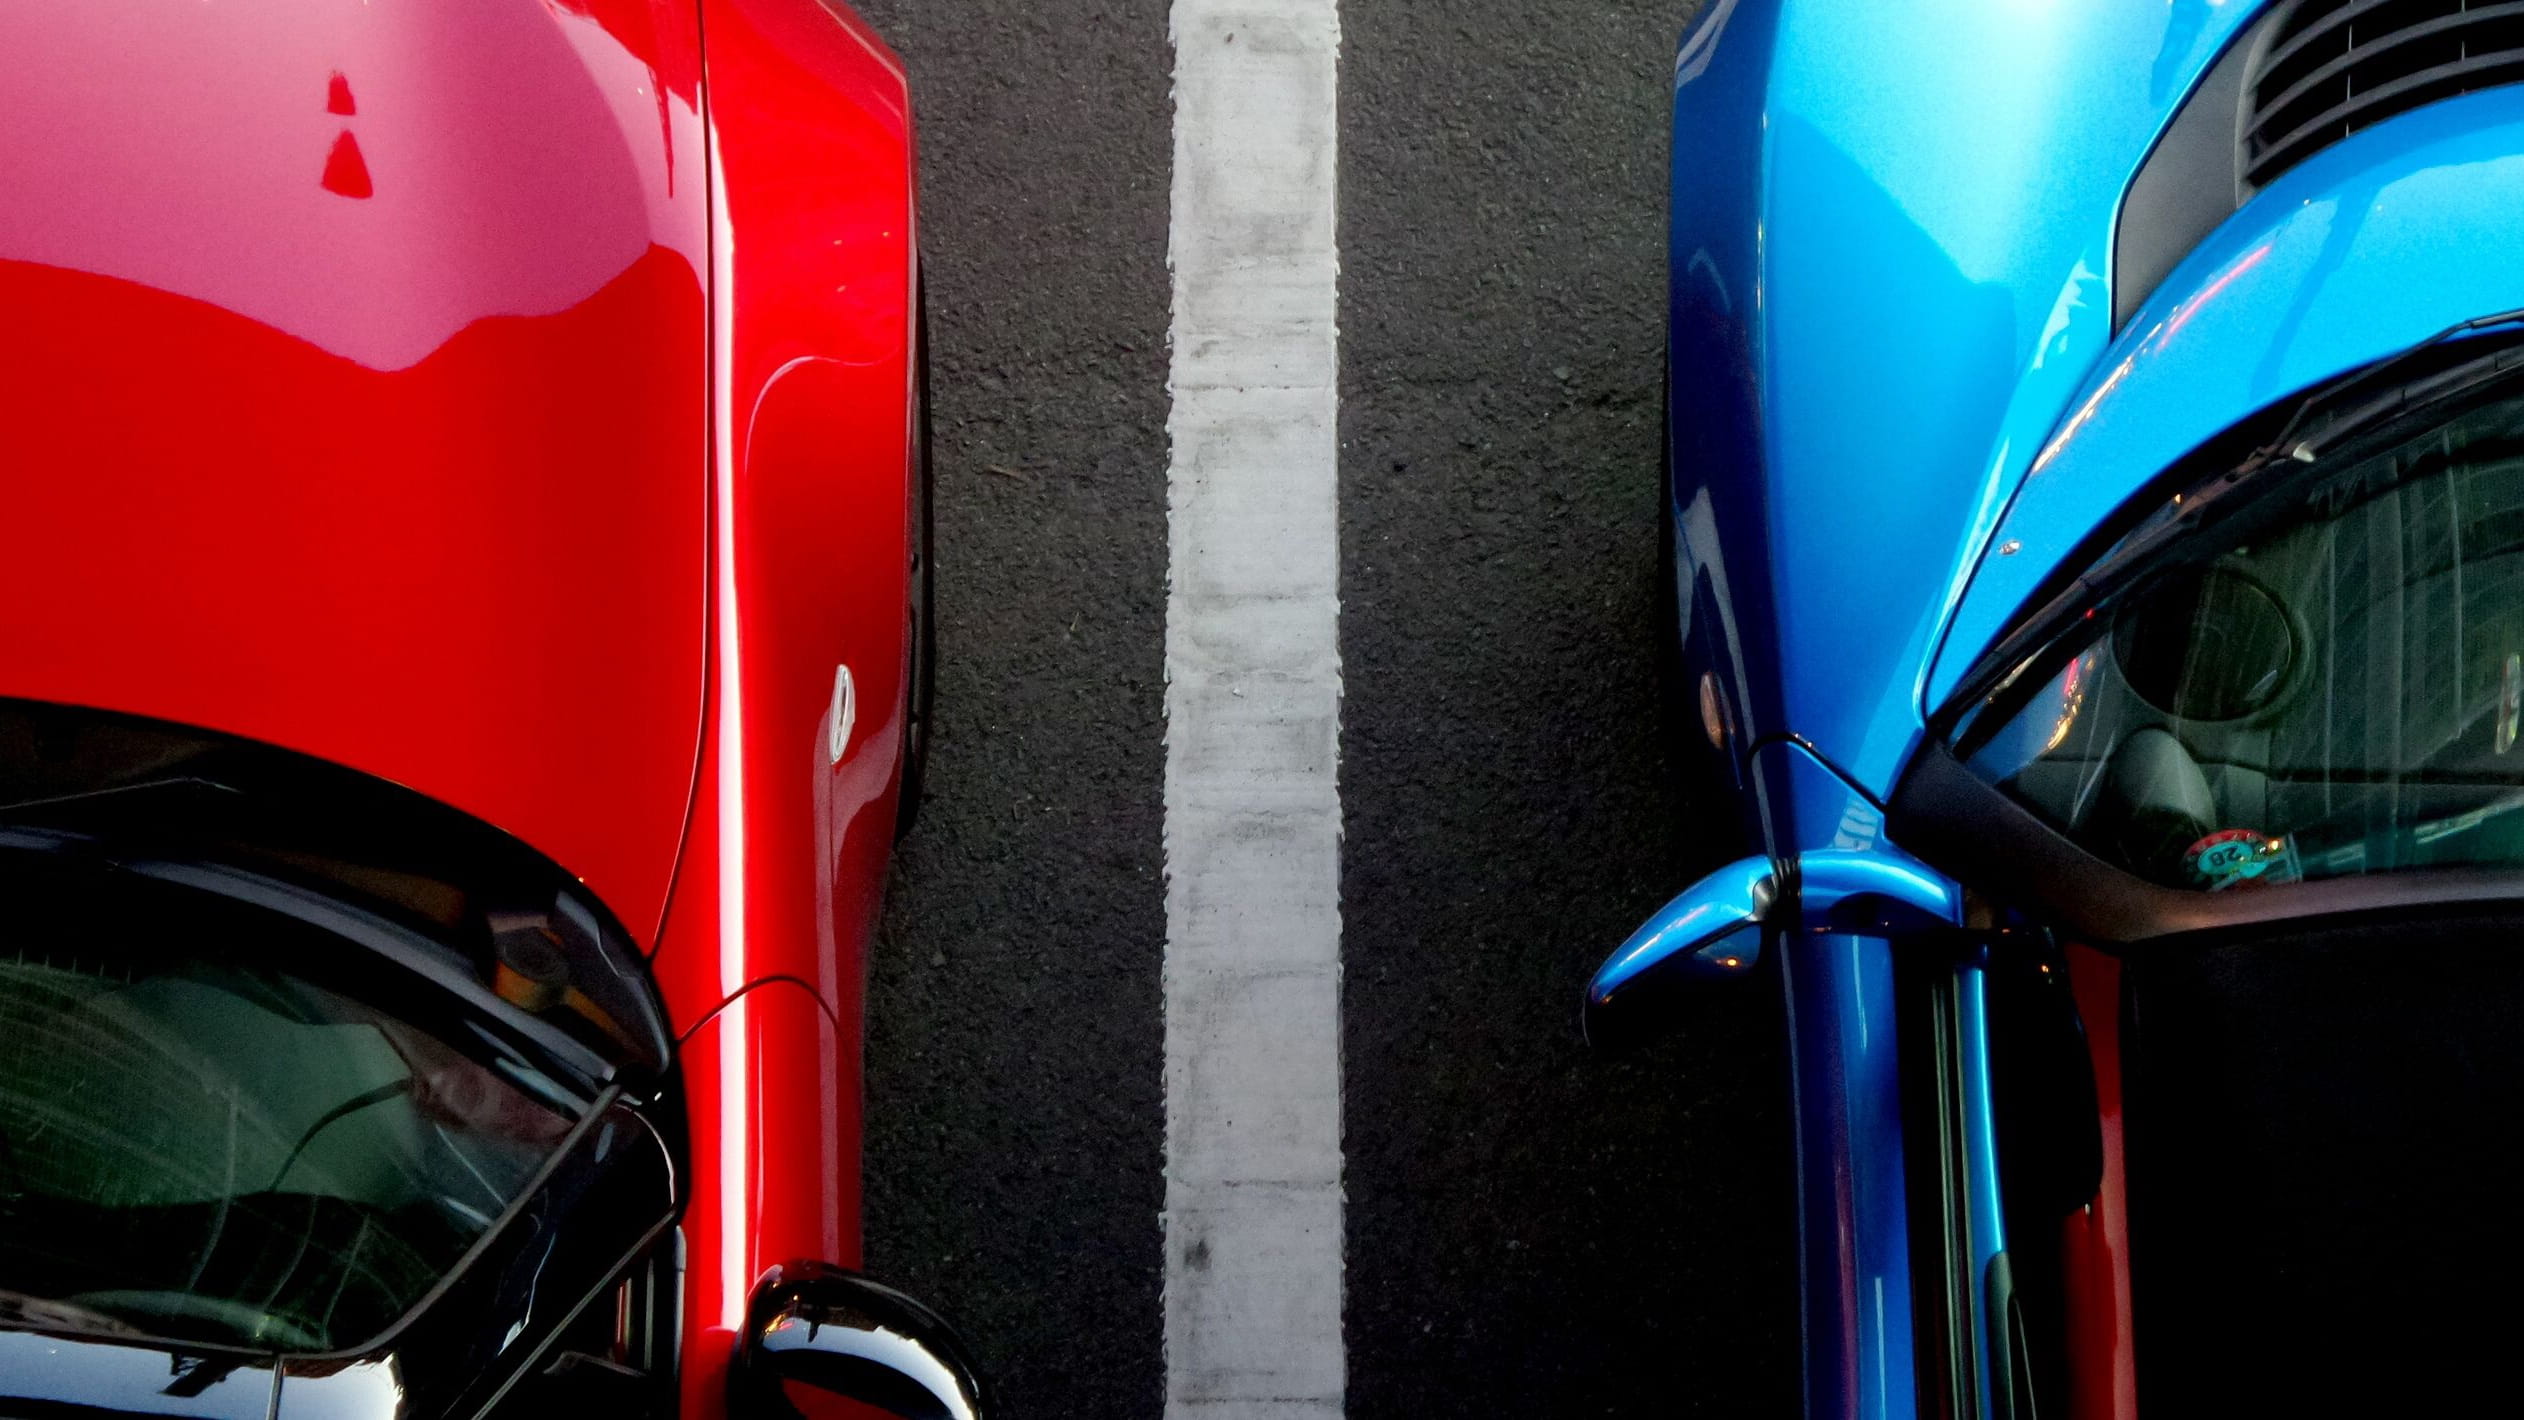 Blue and red car parked